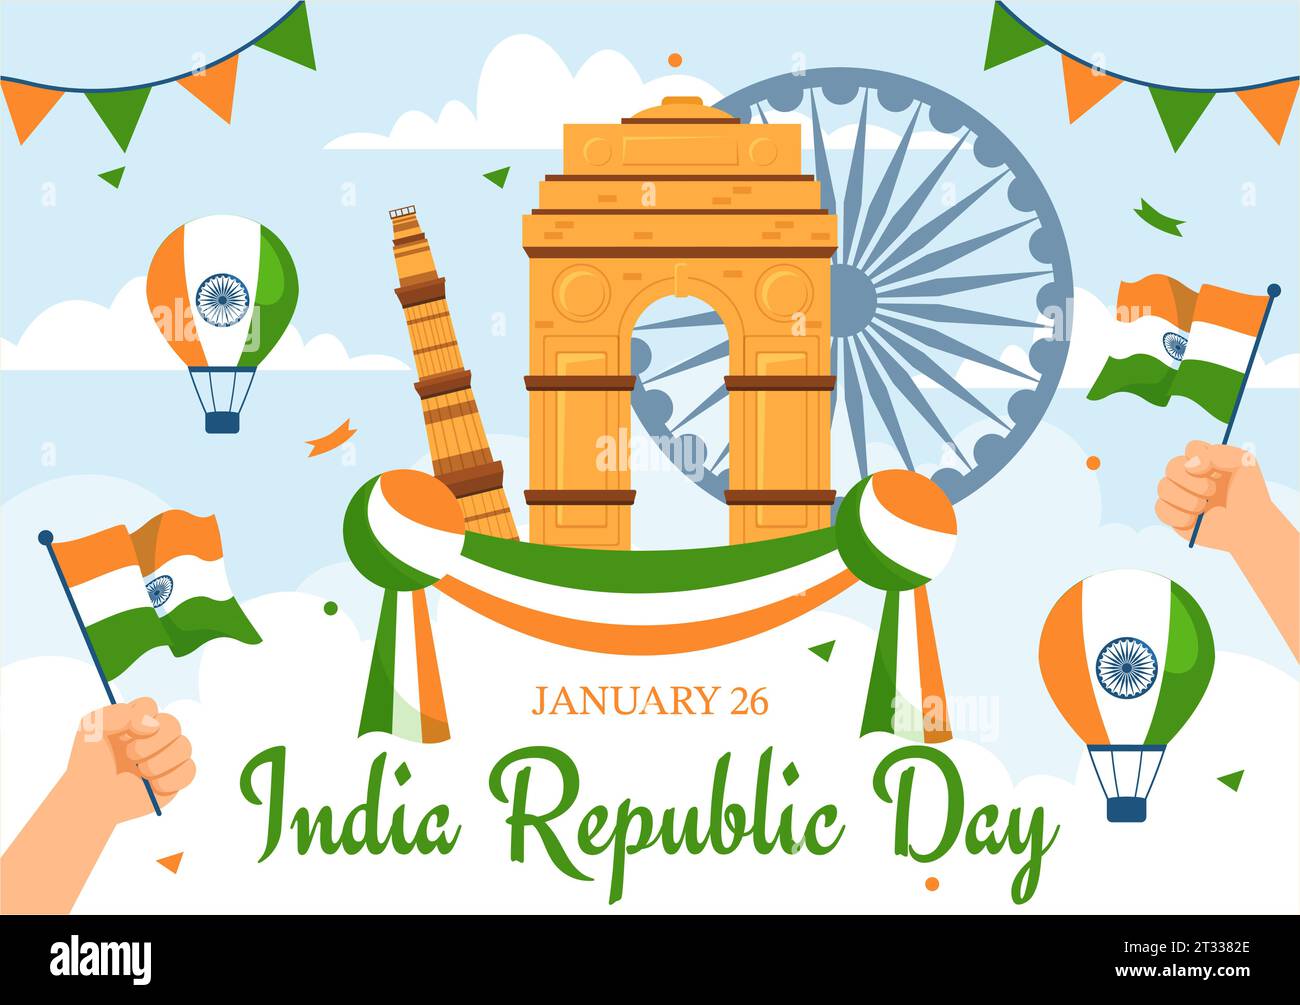 Happy India Republic Day Vector Illustration on 26 January with Indian Flag and Gate in Holiday National Celebration Flat Cartoon Background Design Stock Vector